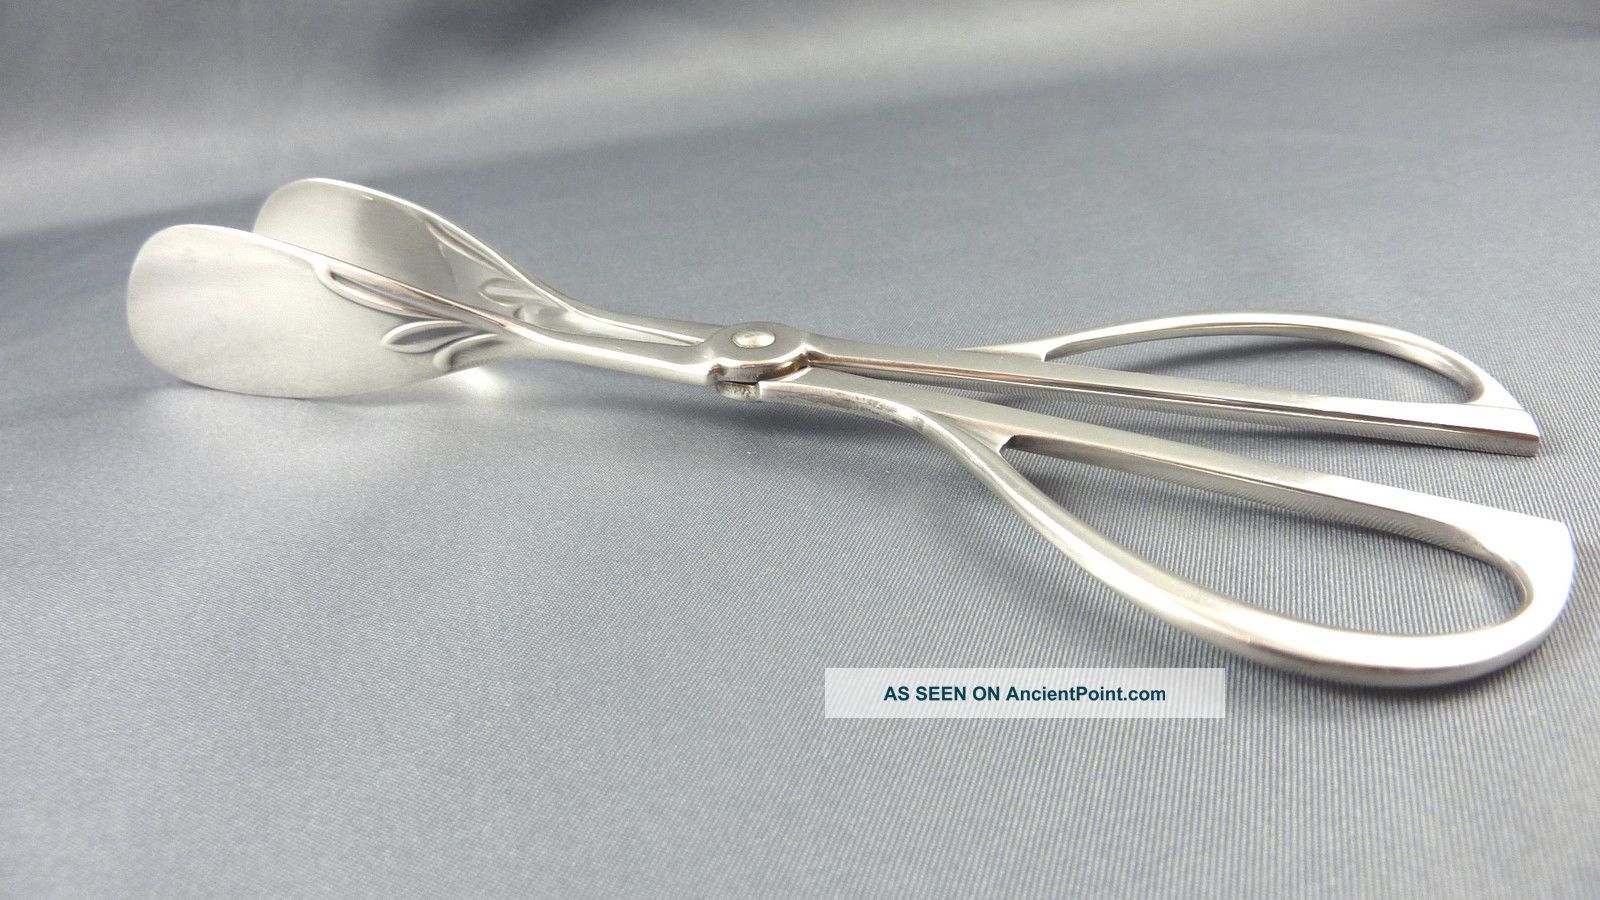 Charming Art Nouveau Silverplated Serving Tongs Pastry Tongs By Wmf Art Nouveau photo